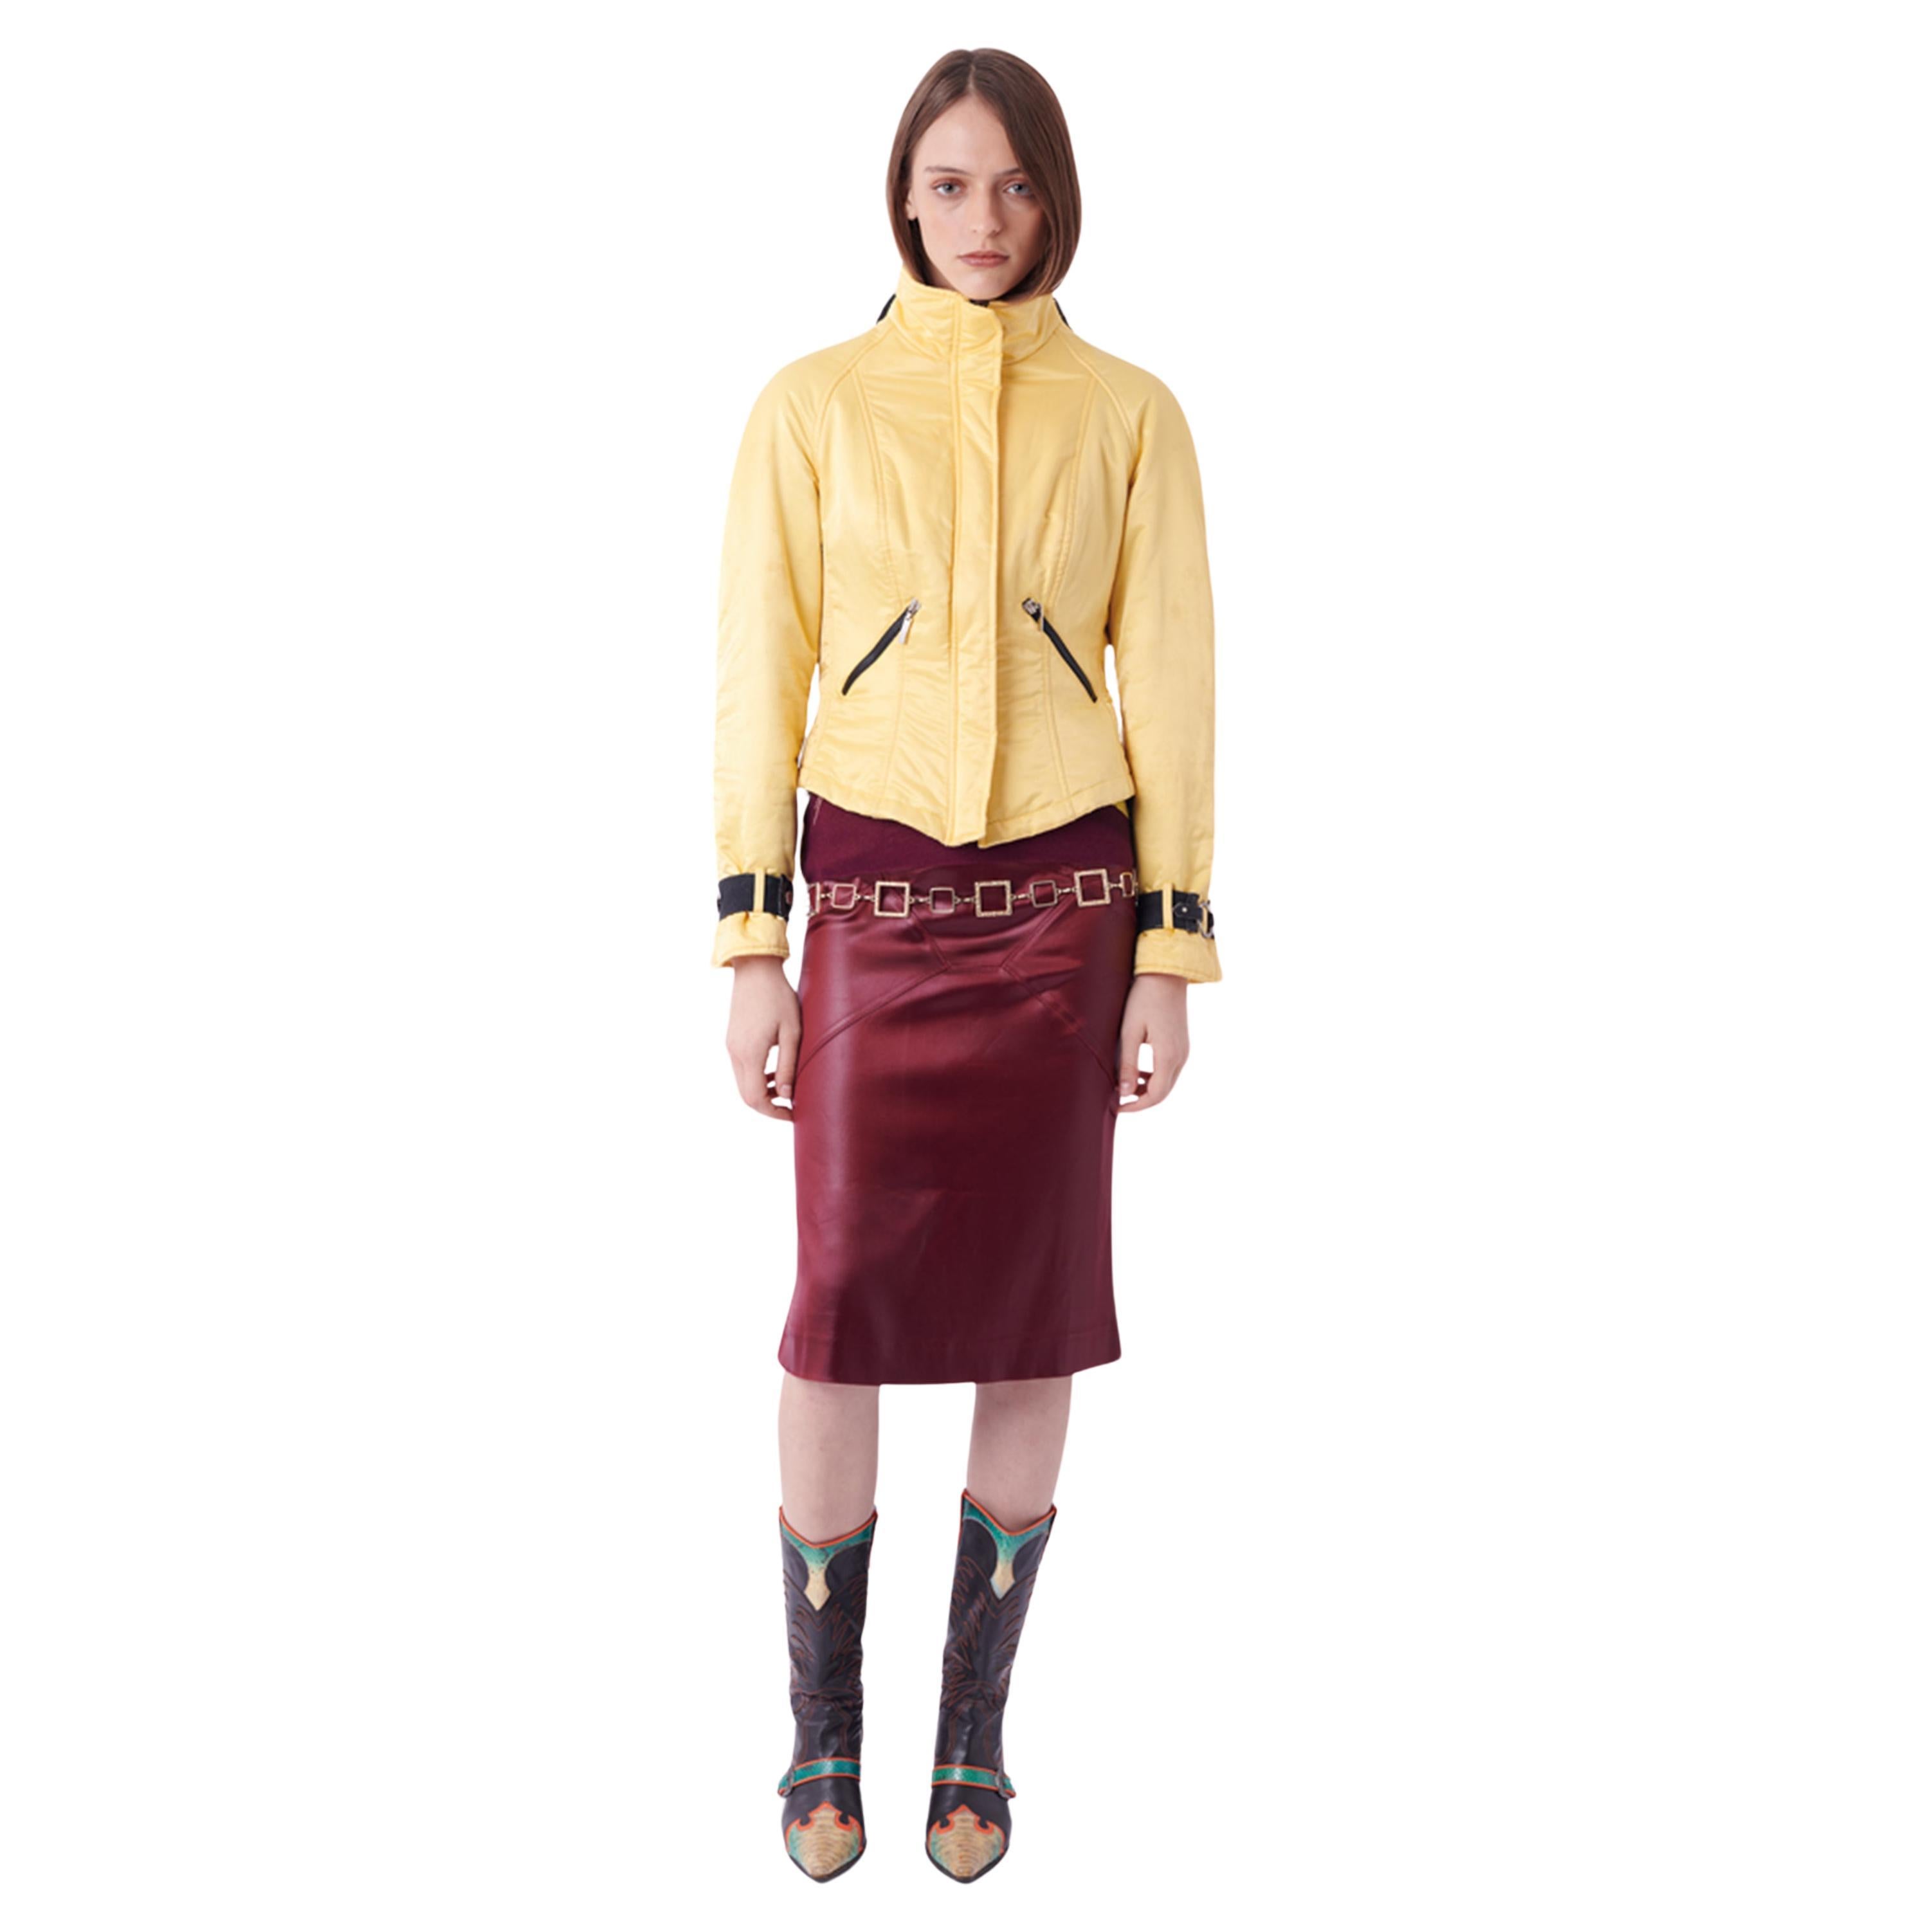 Roccobarocco S/S 2000 Padded Yellow Jacket For Sale